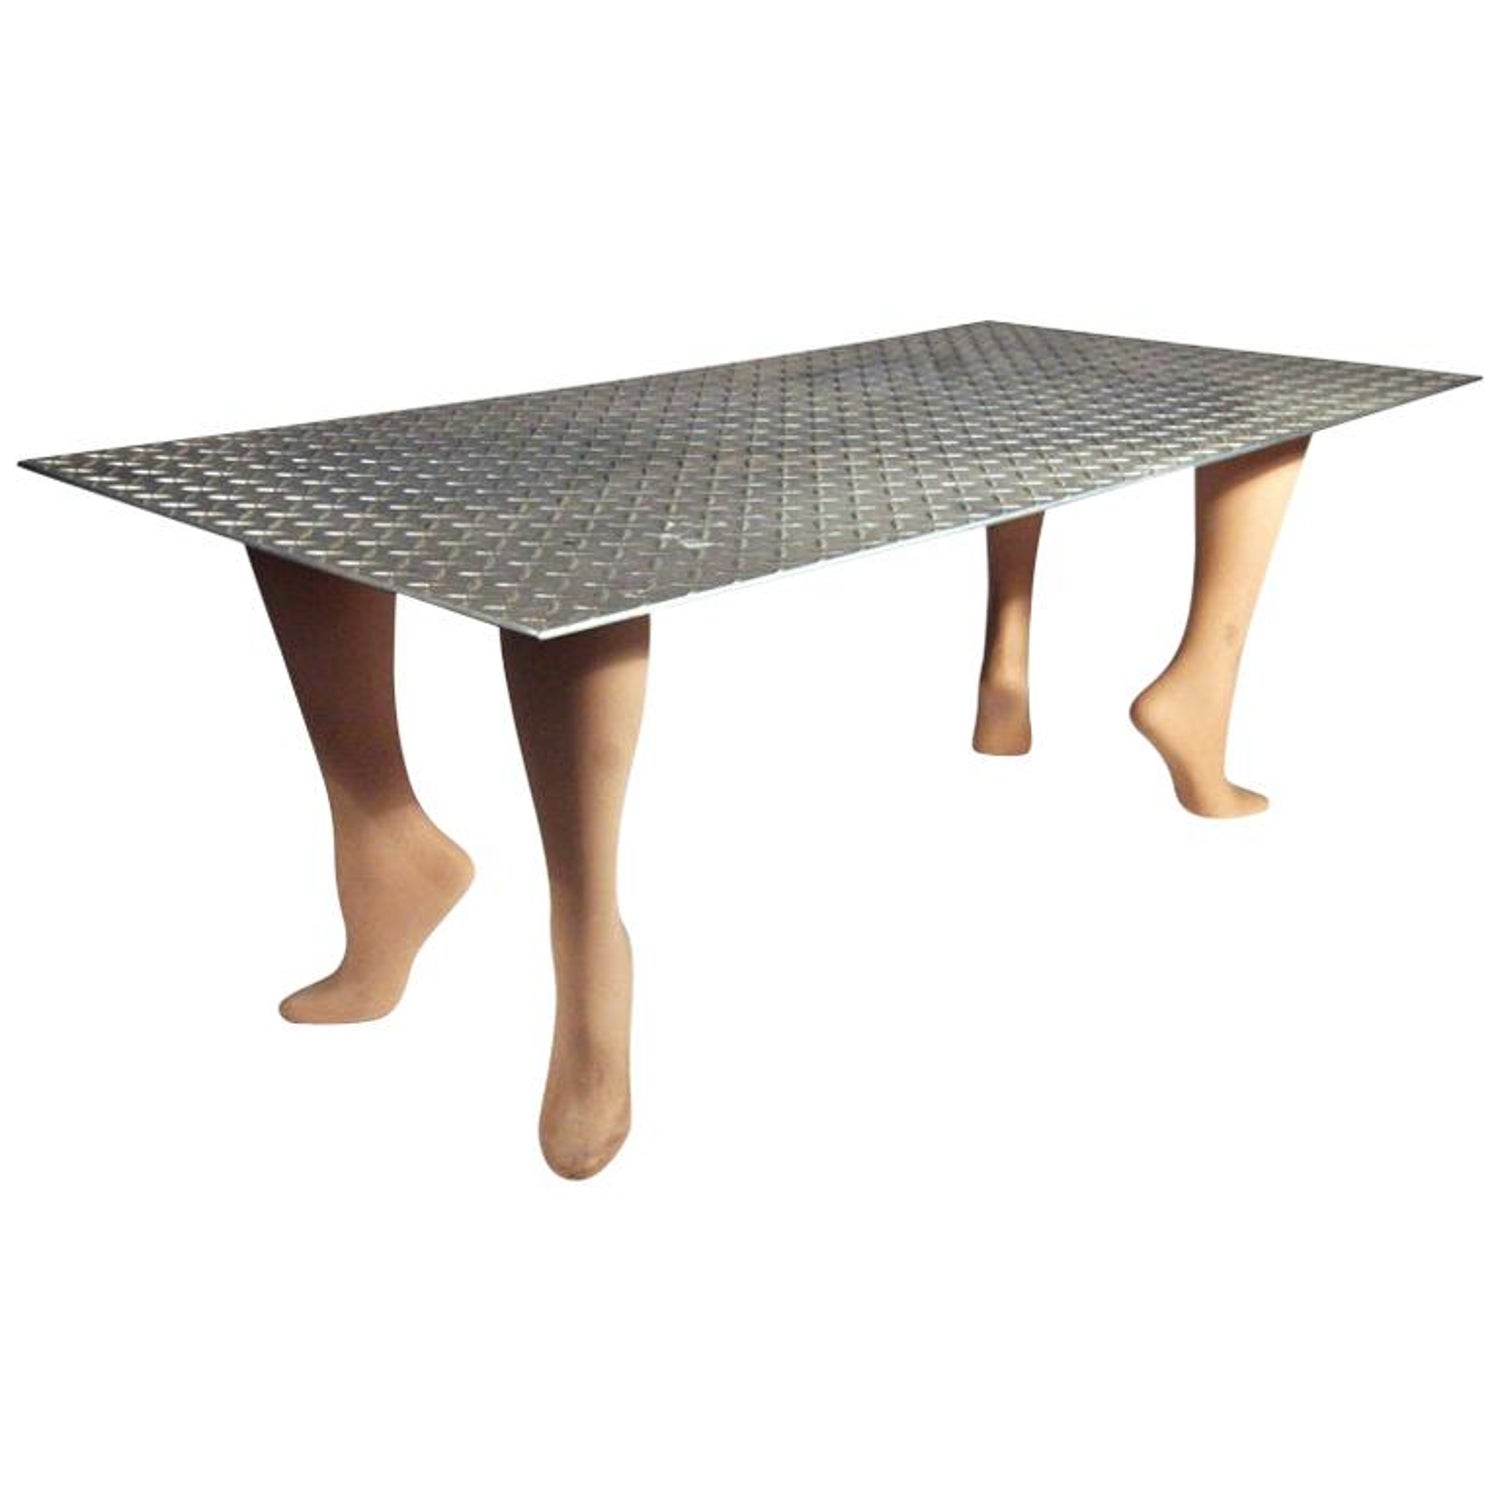 Playful Pop Art "Footsie" Coffee Table For Sale at 1stDibs